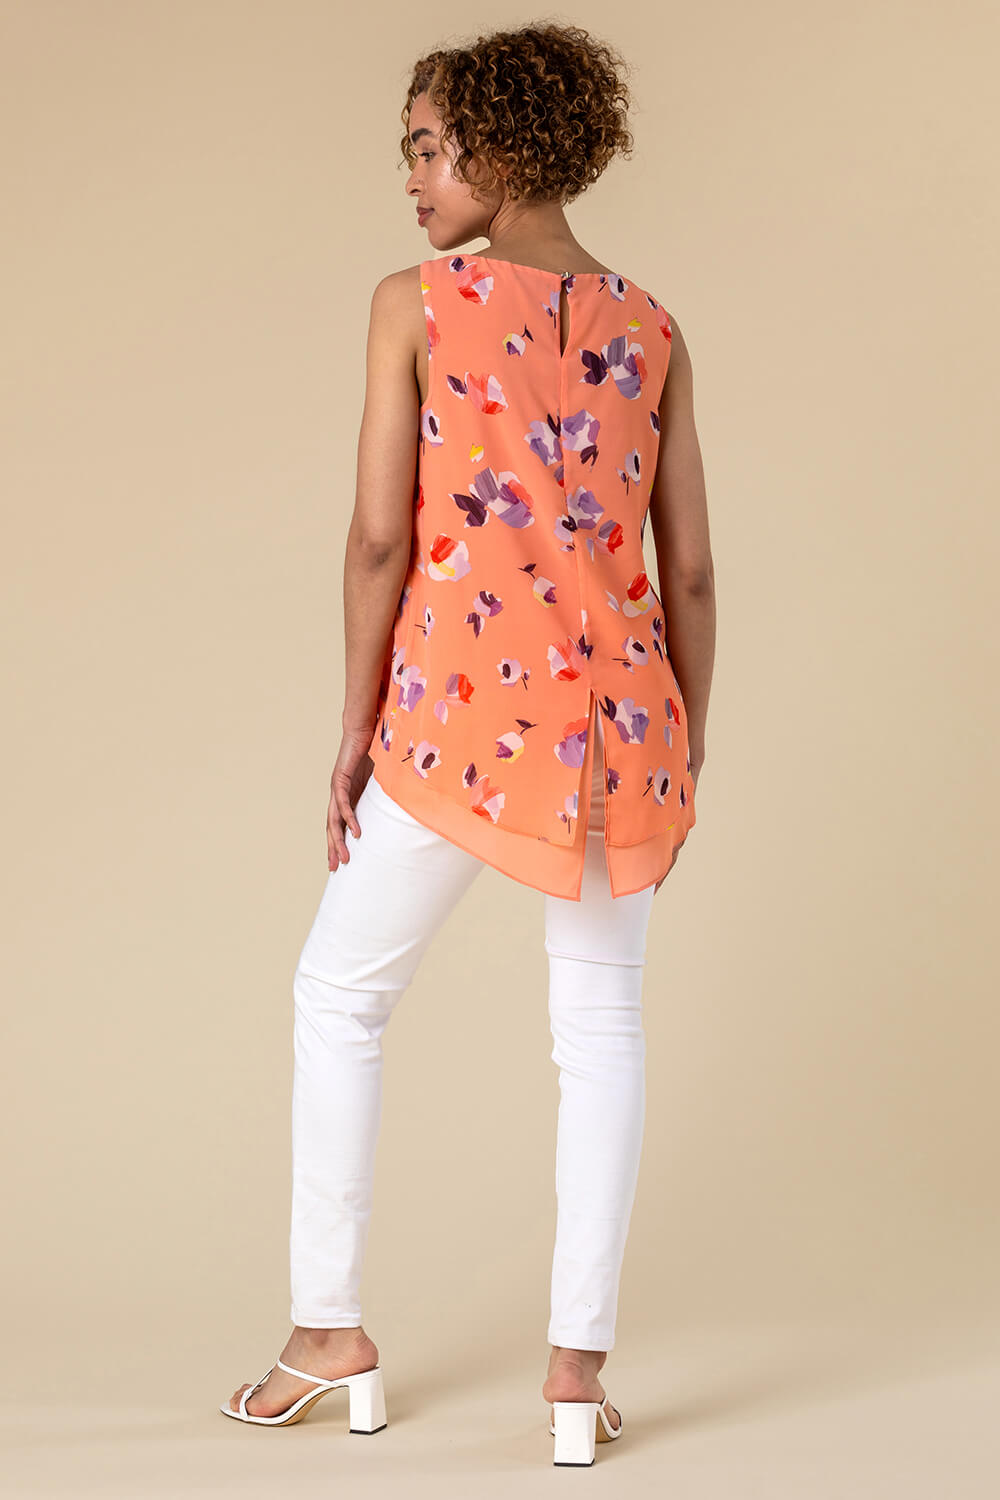 CORAL Abstract Floral Print Vest Top, Image 2 of 4